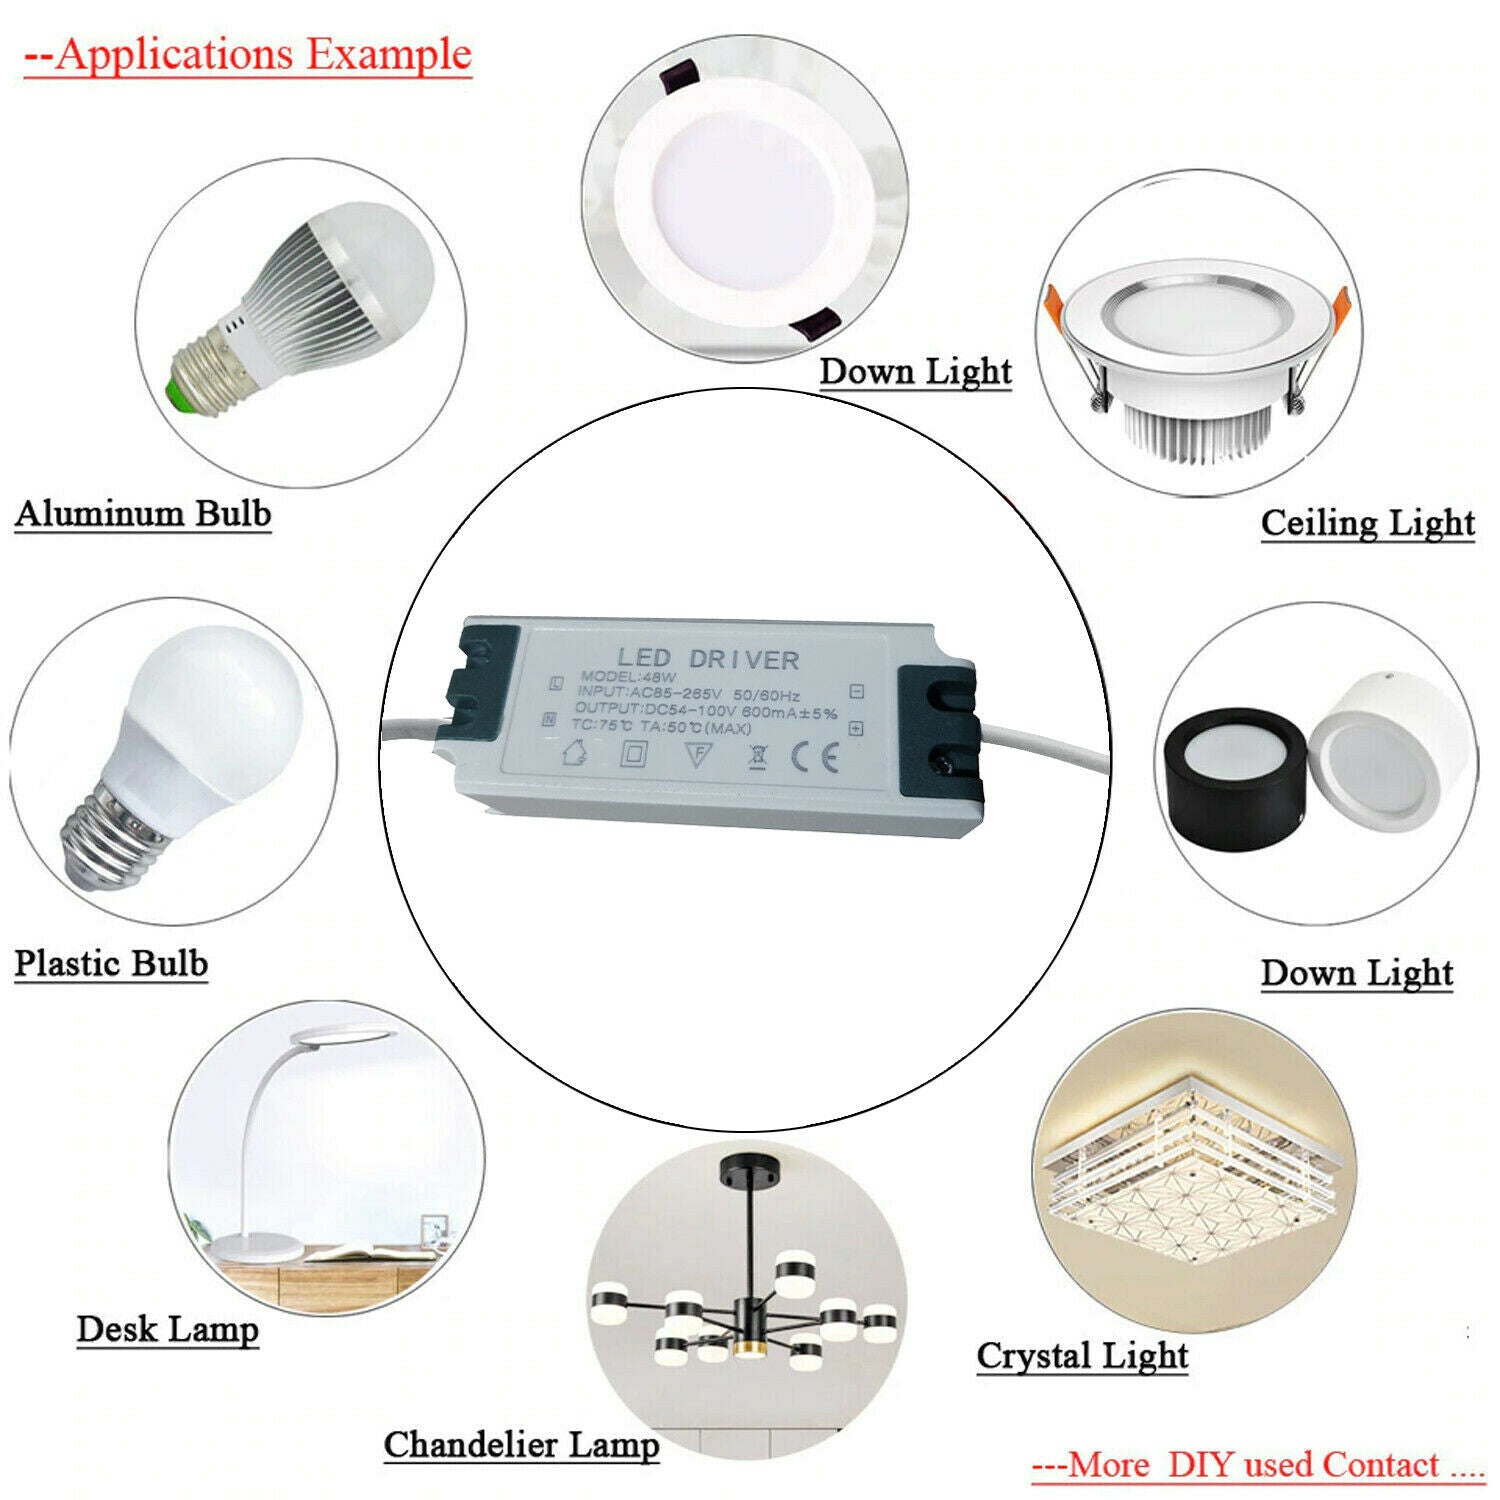 Constant Current 600mA High Power DC Connector Power Supply LED Ceiling light~1061 - LEDSone UK Ltd